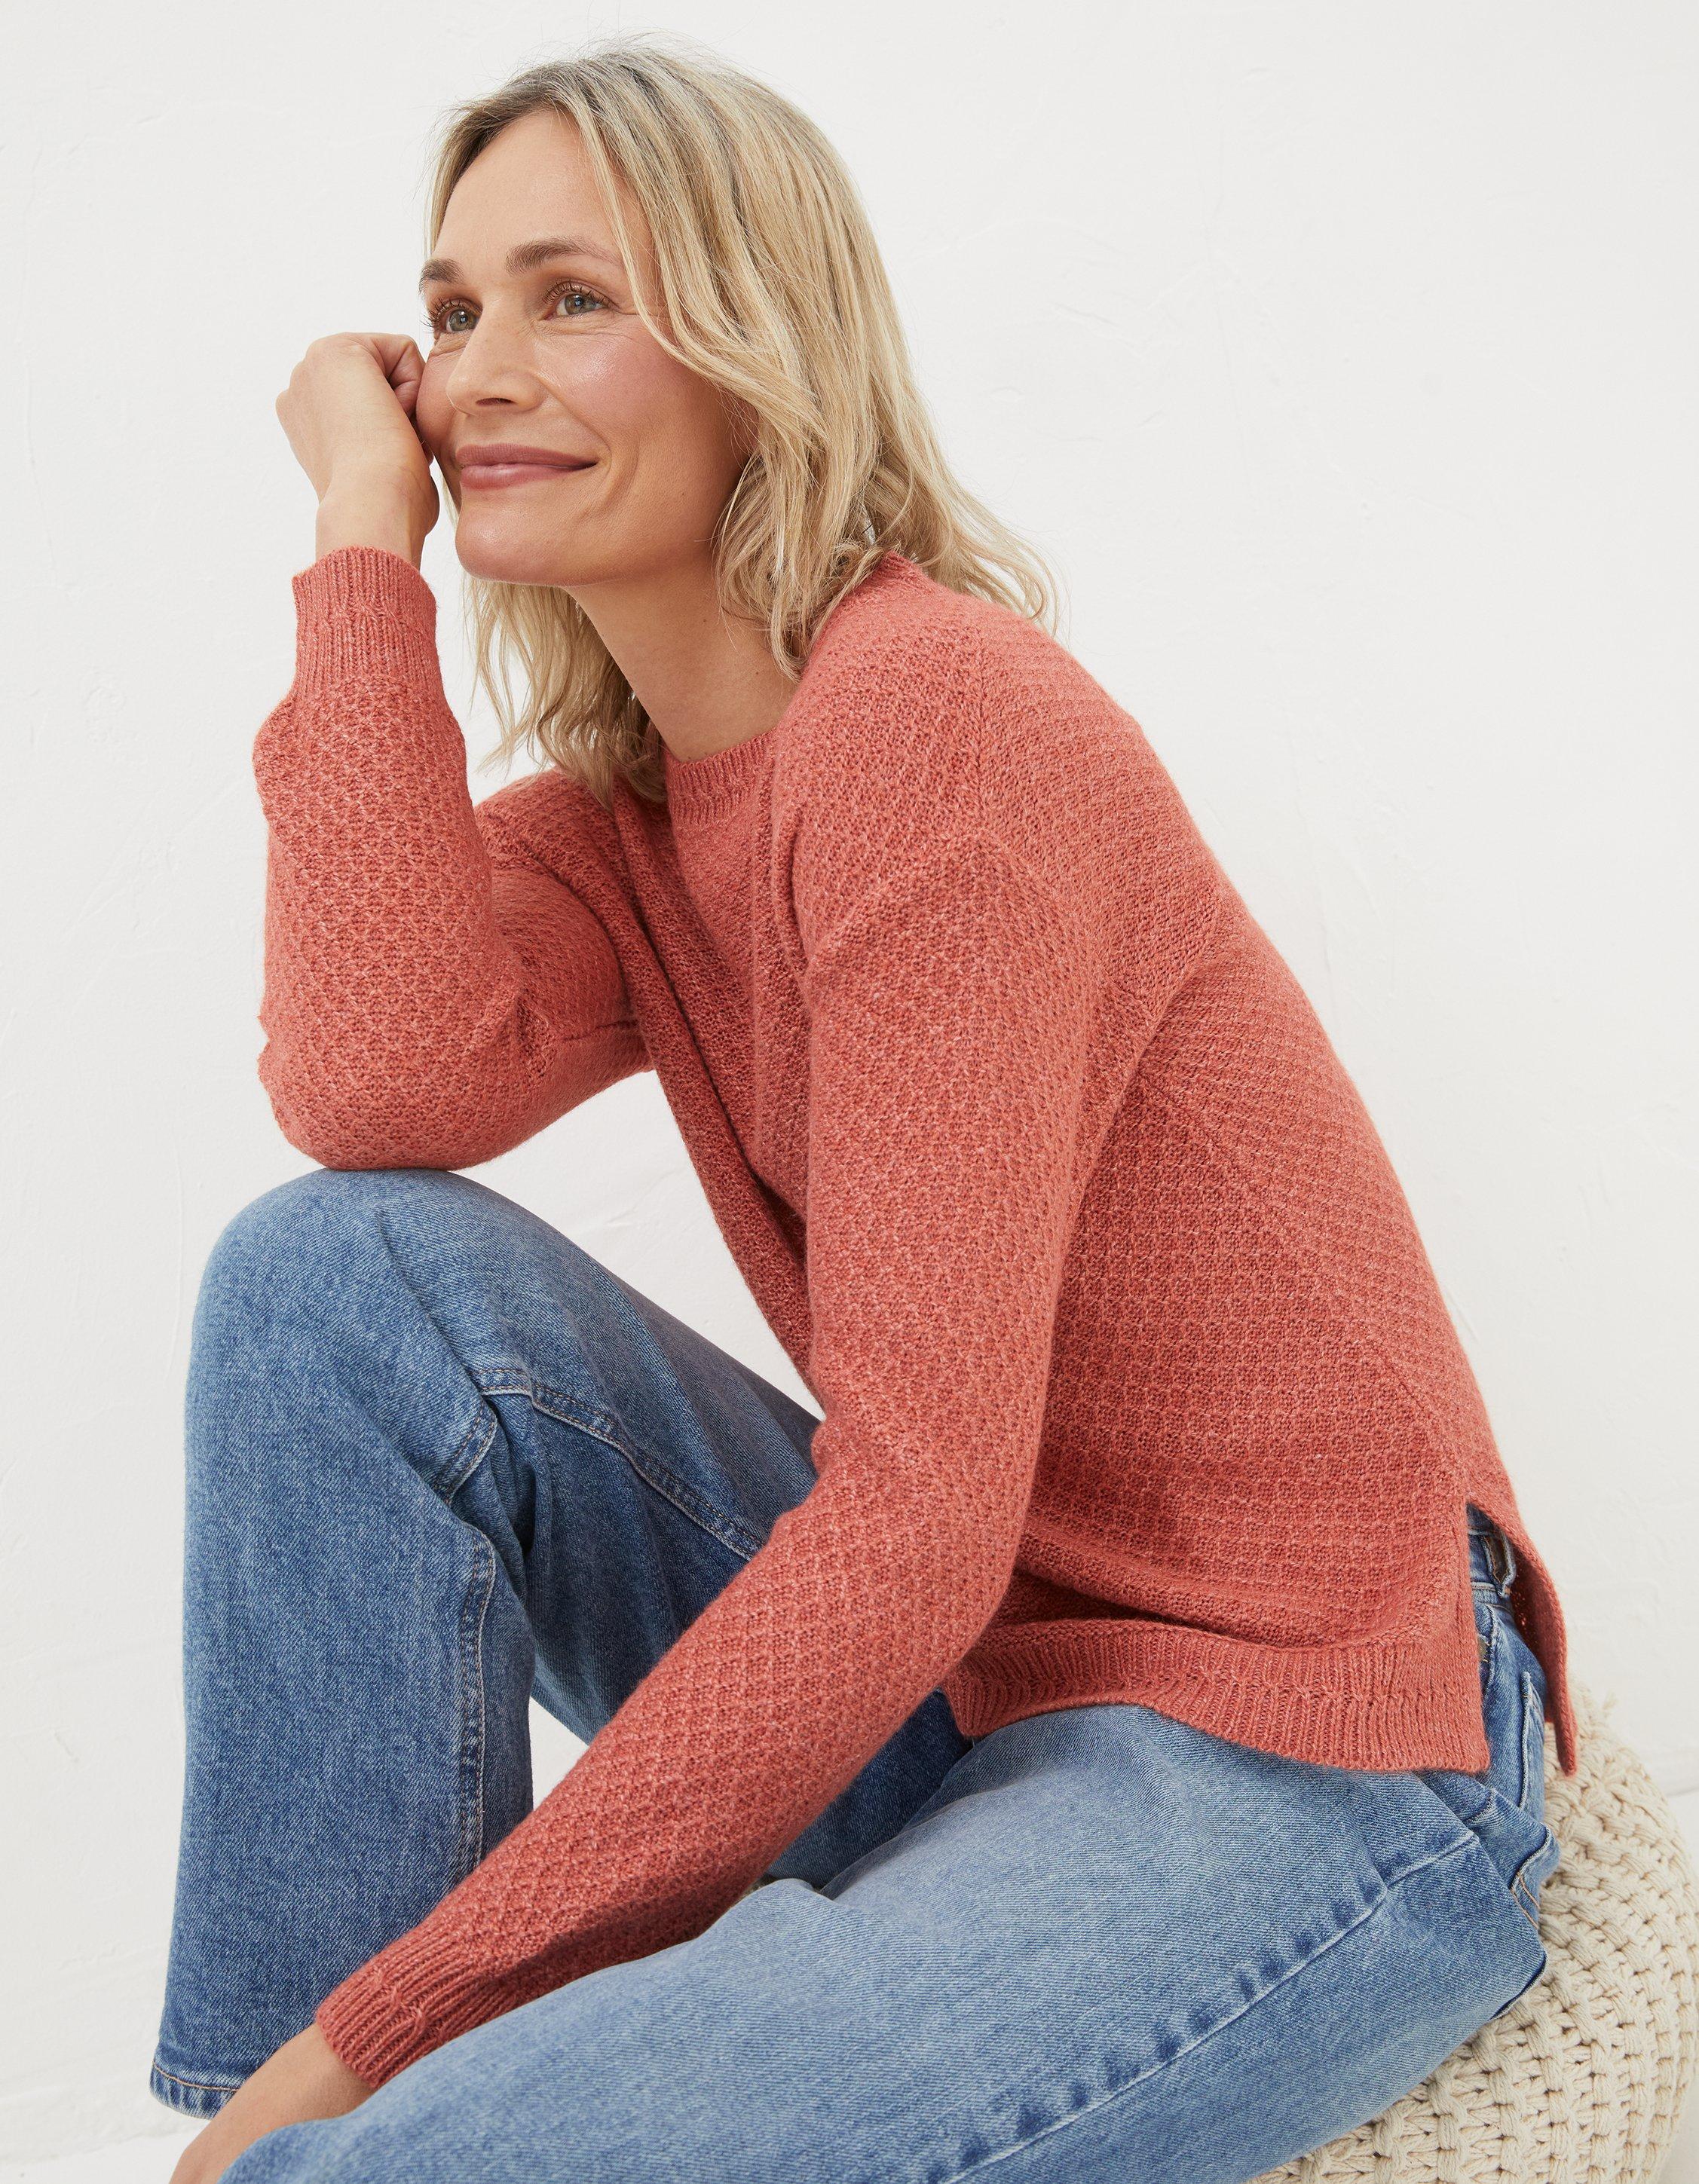 Ladies Jumpers, Sweaters & Cardigans for Women